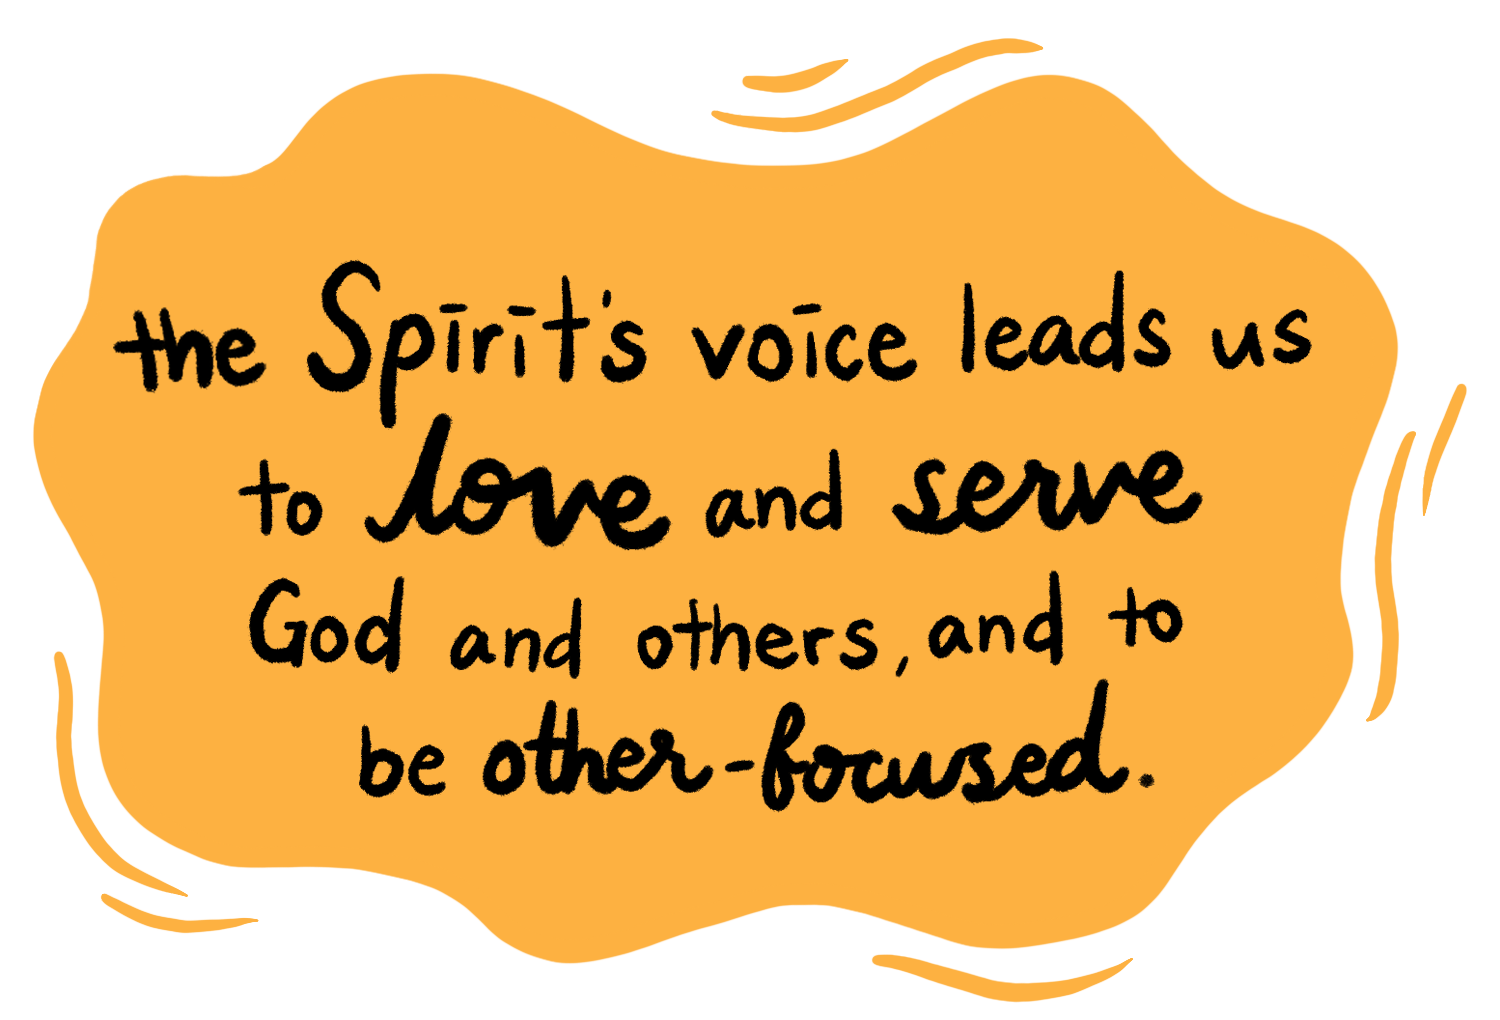 the Spirit’s voice leads us to love and serve God and others, and to be other-focused